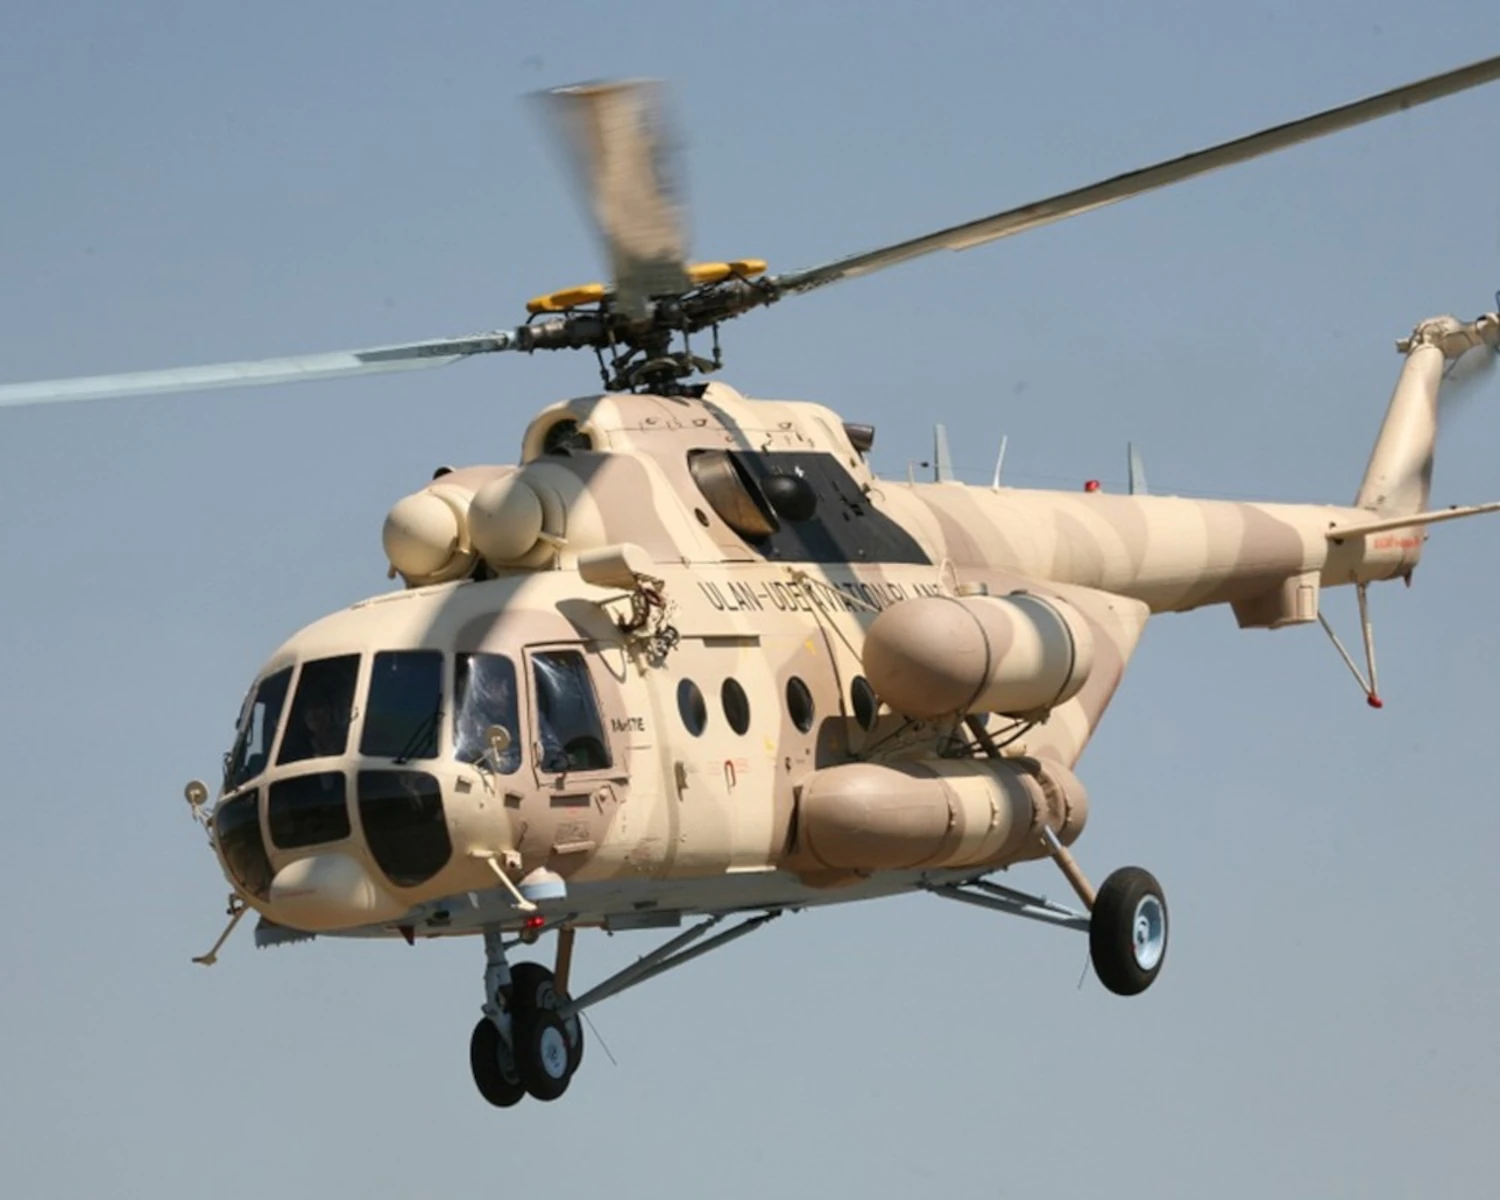 Moscow calls U.S. delivery of Russian-made Mil Mi-17 helicopters to Ukraine’ illegal’